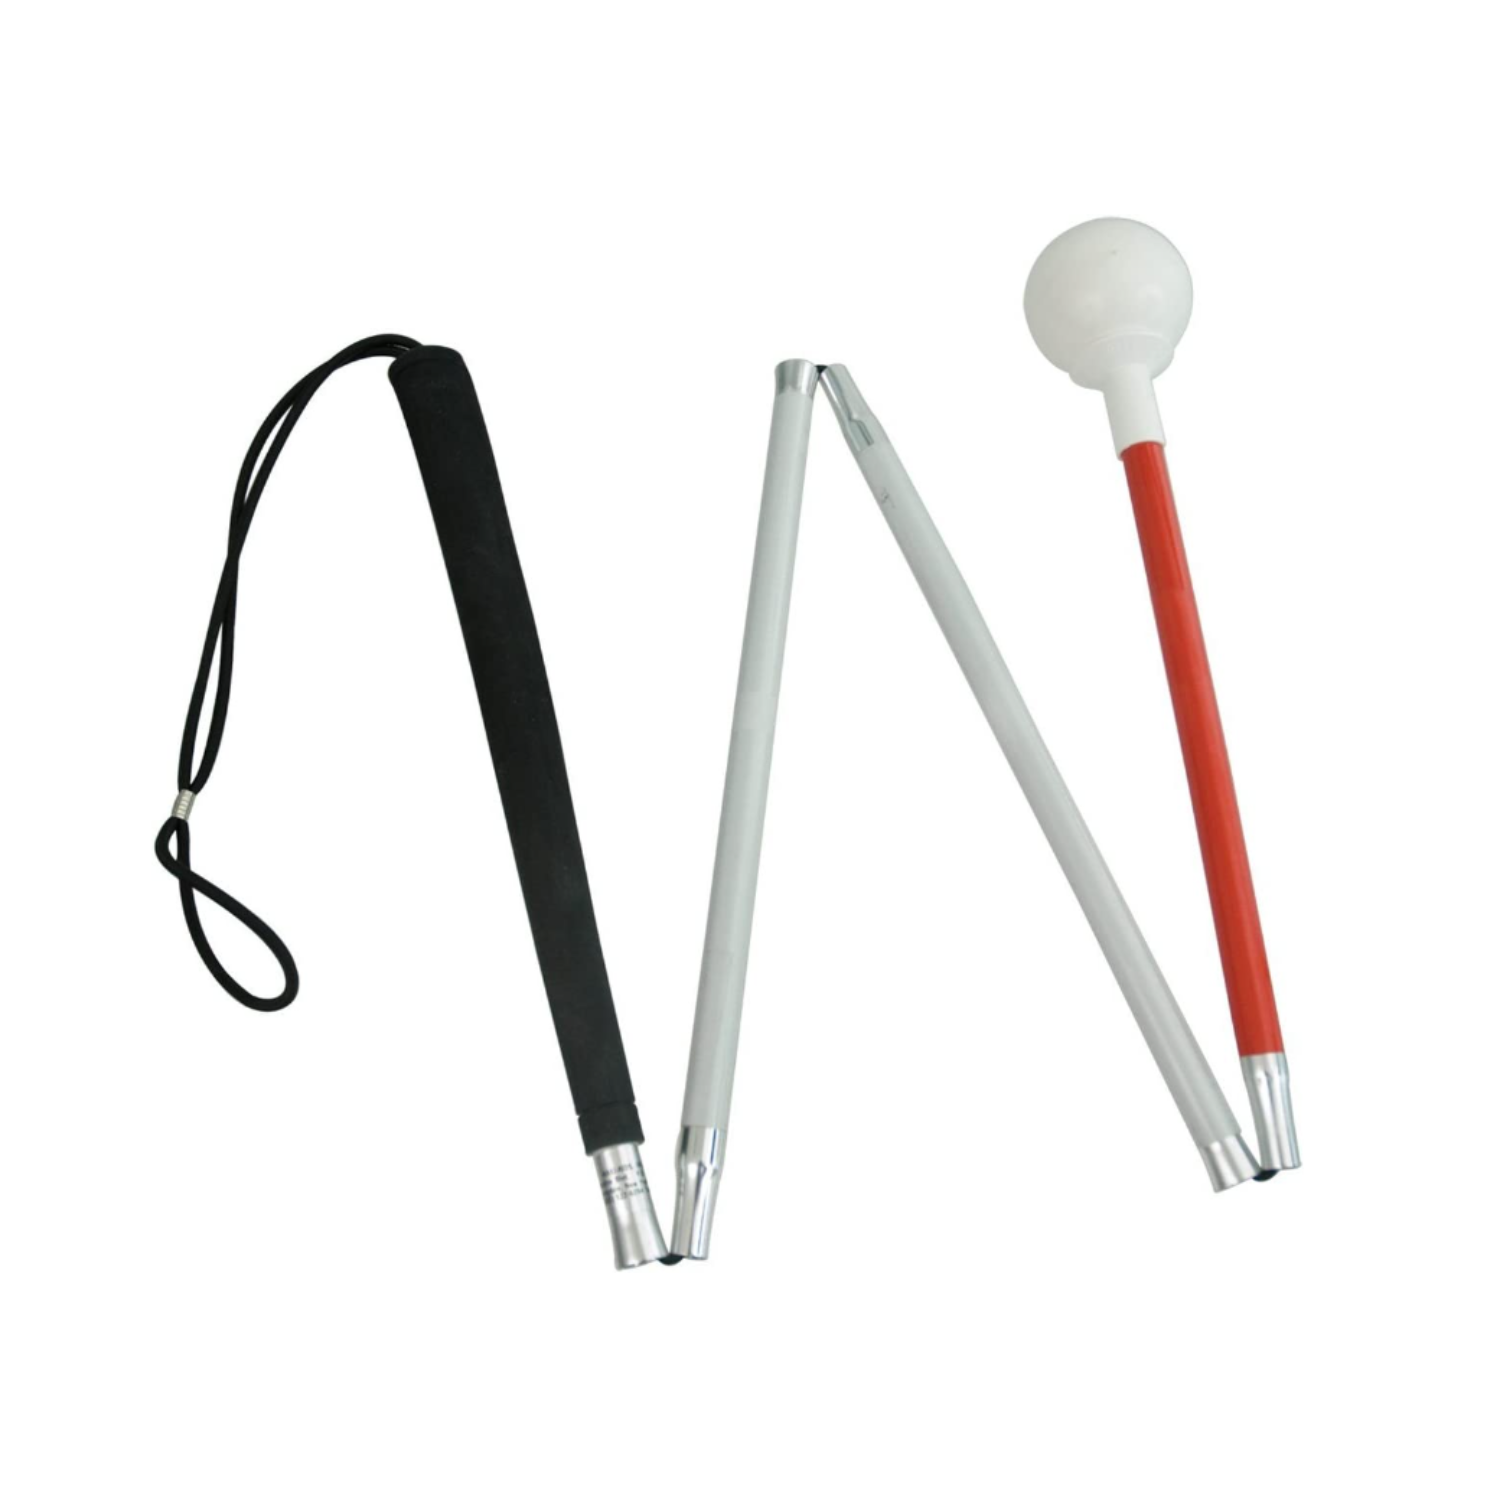 Image of a white aluminum mobility cane with roller ball tip from Ambutech.